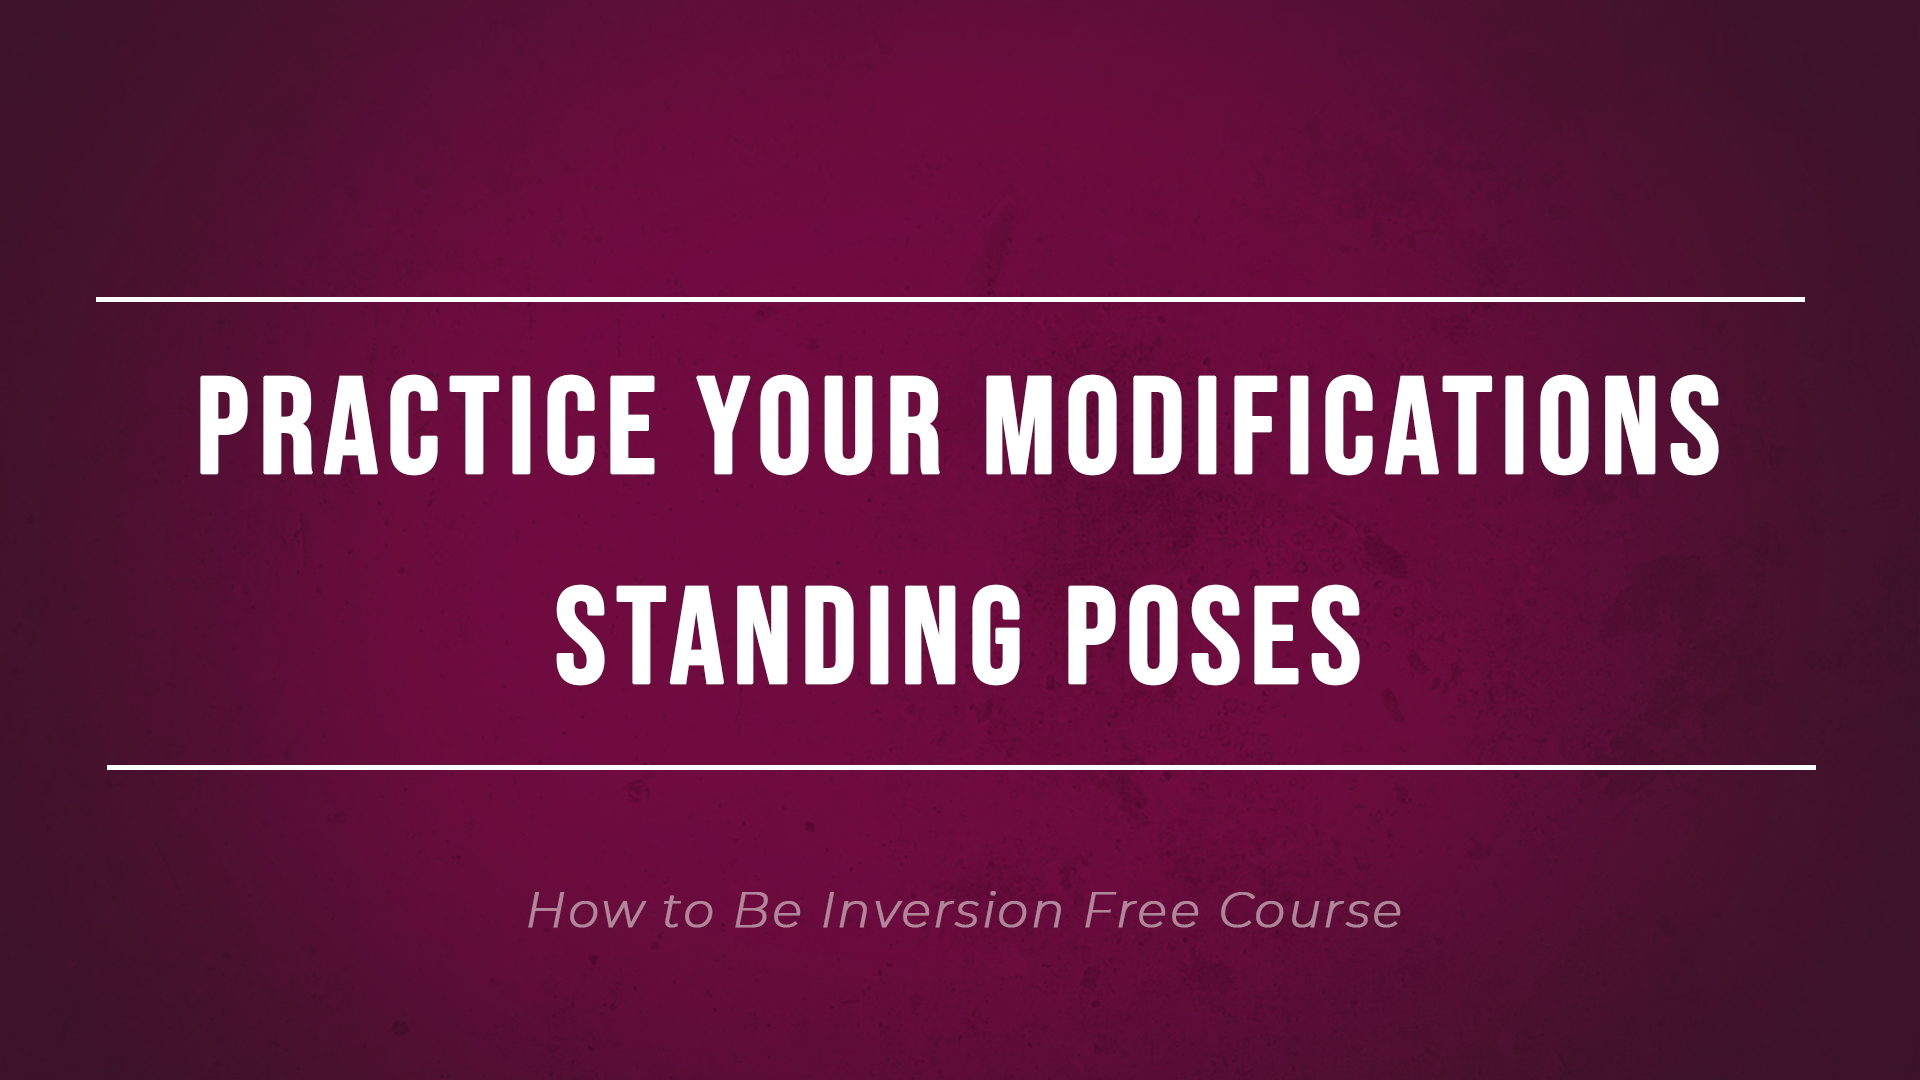 Practice Your Modifications Standing Poses